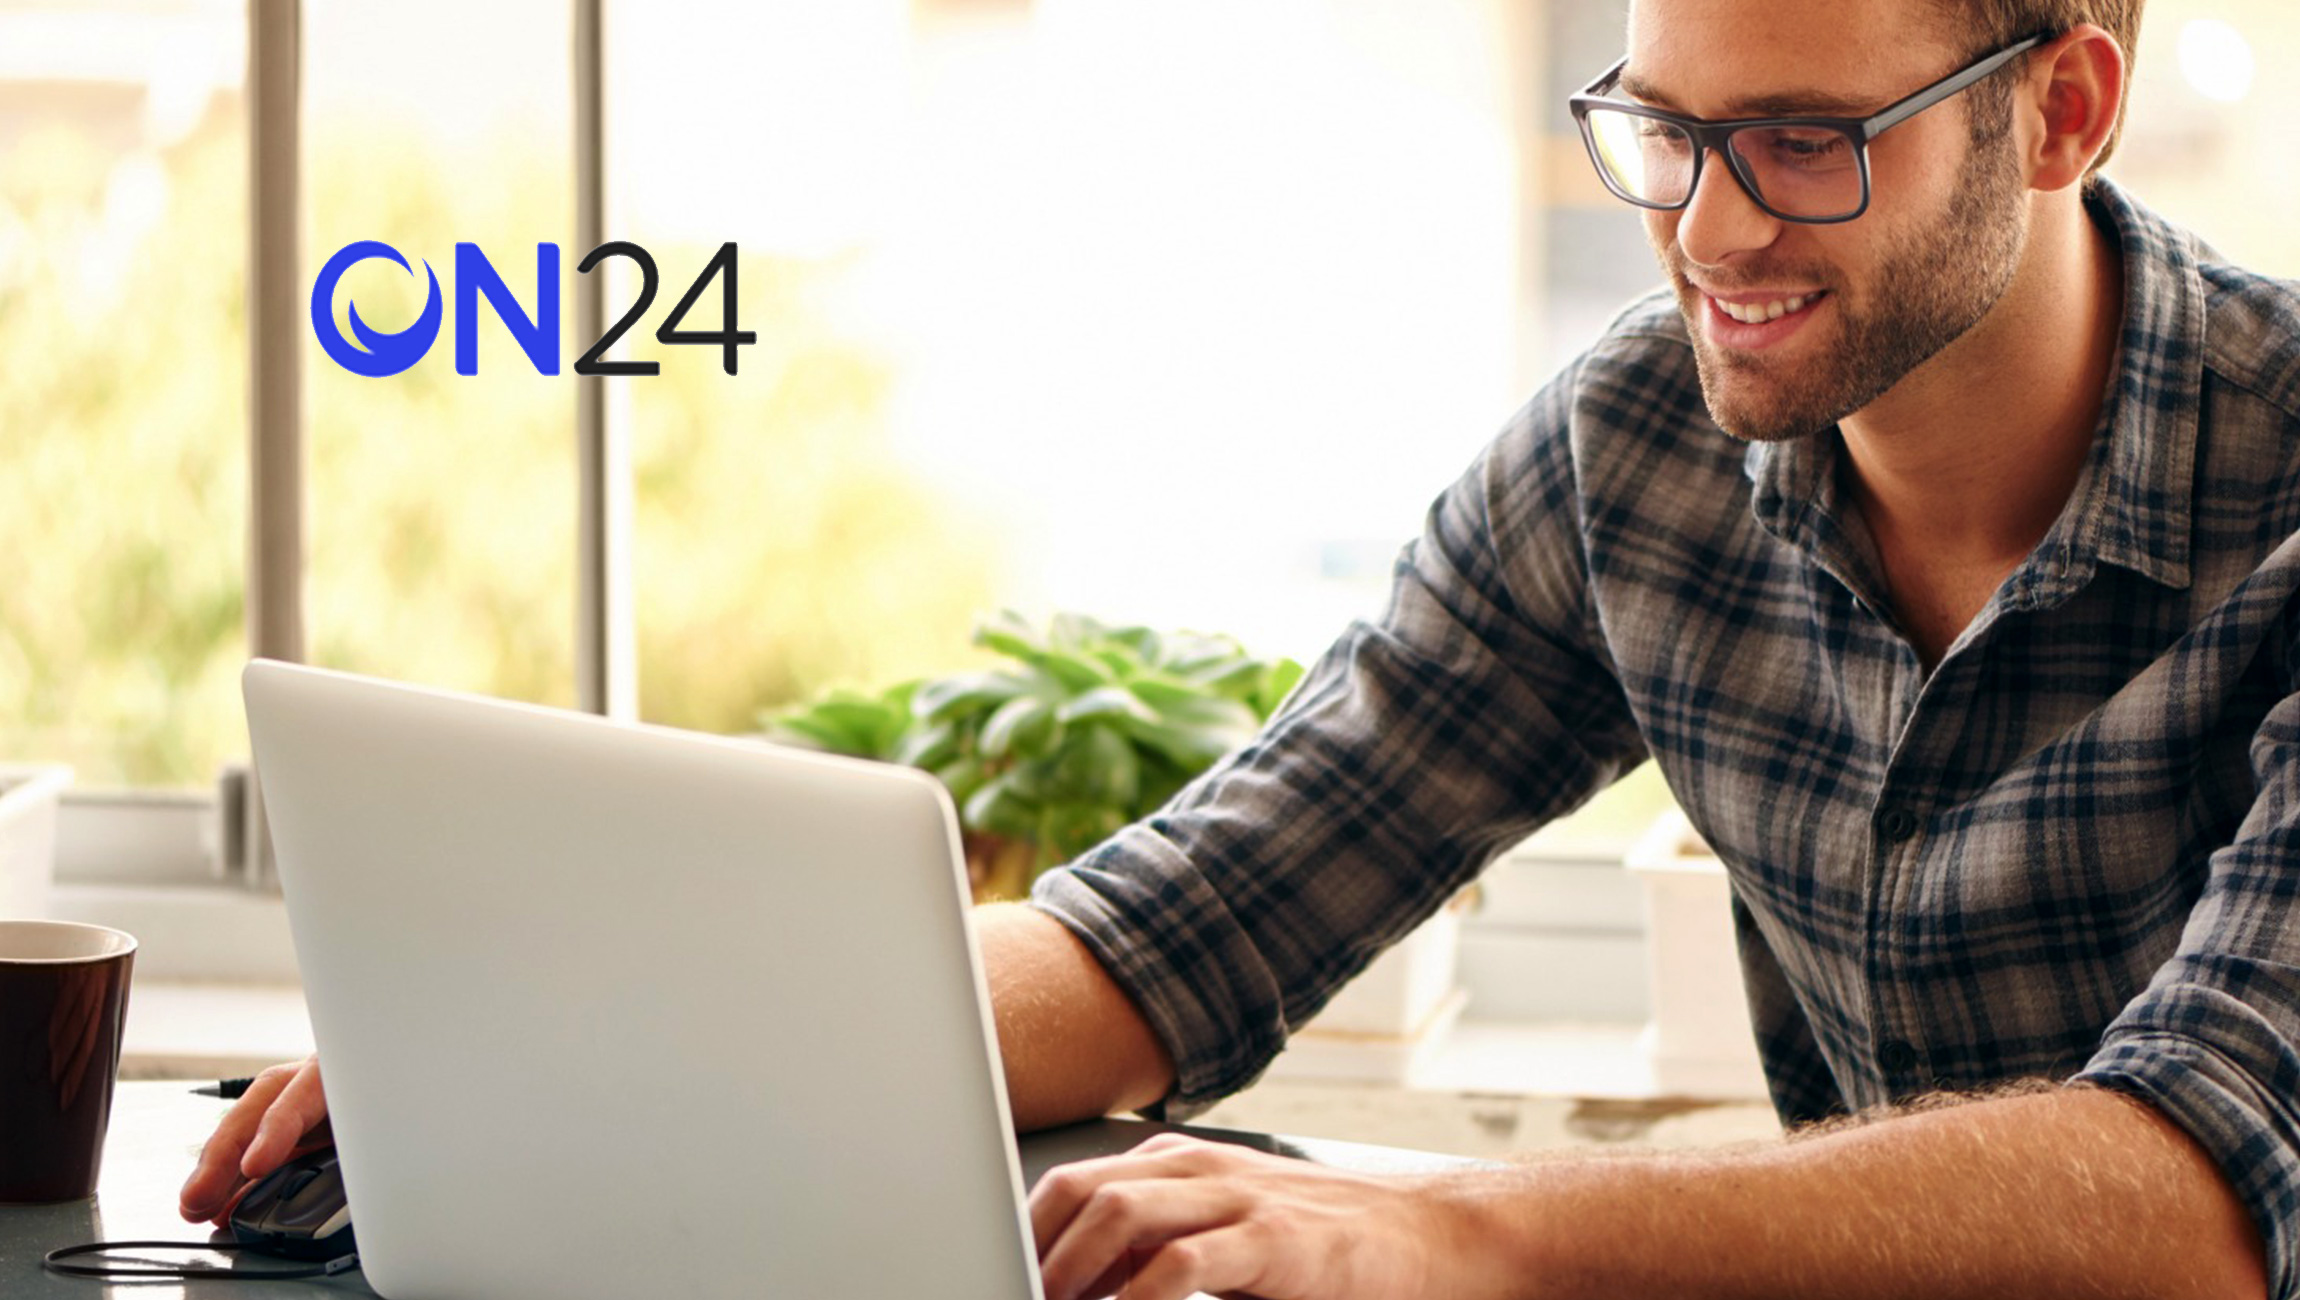 ON24 Launches ON24 Target, Enabling Marketers to Create and Deliver Personalized Experiences